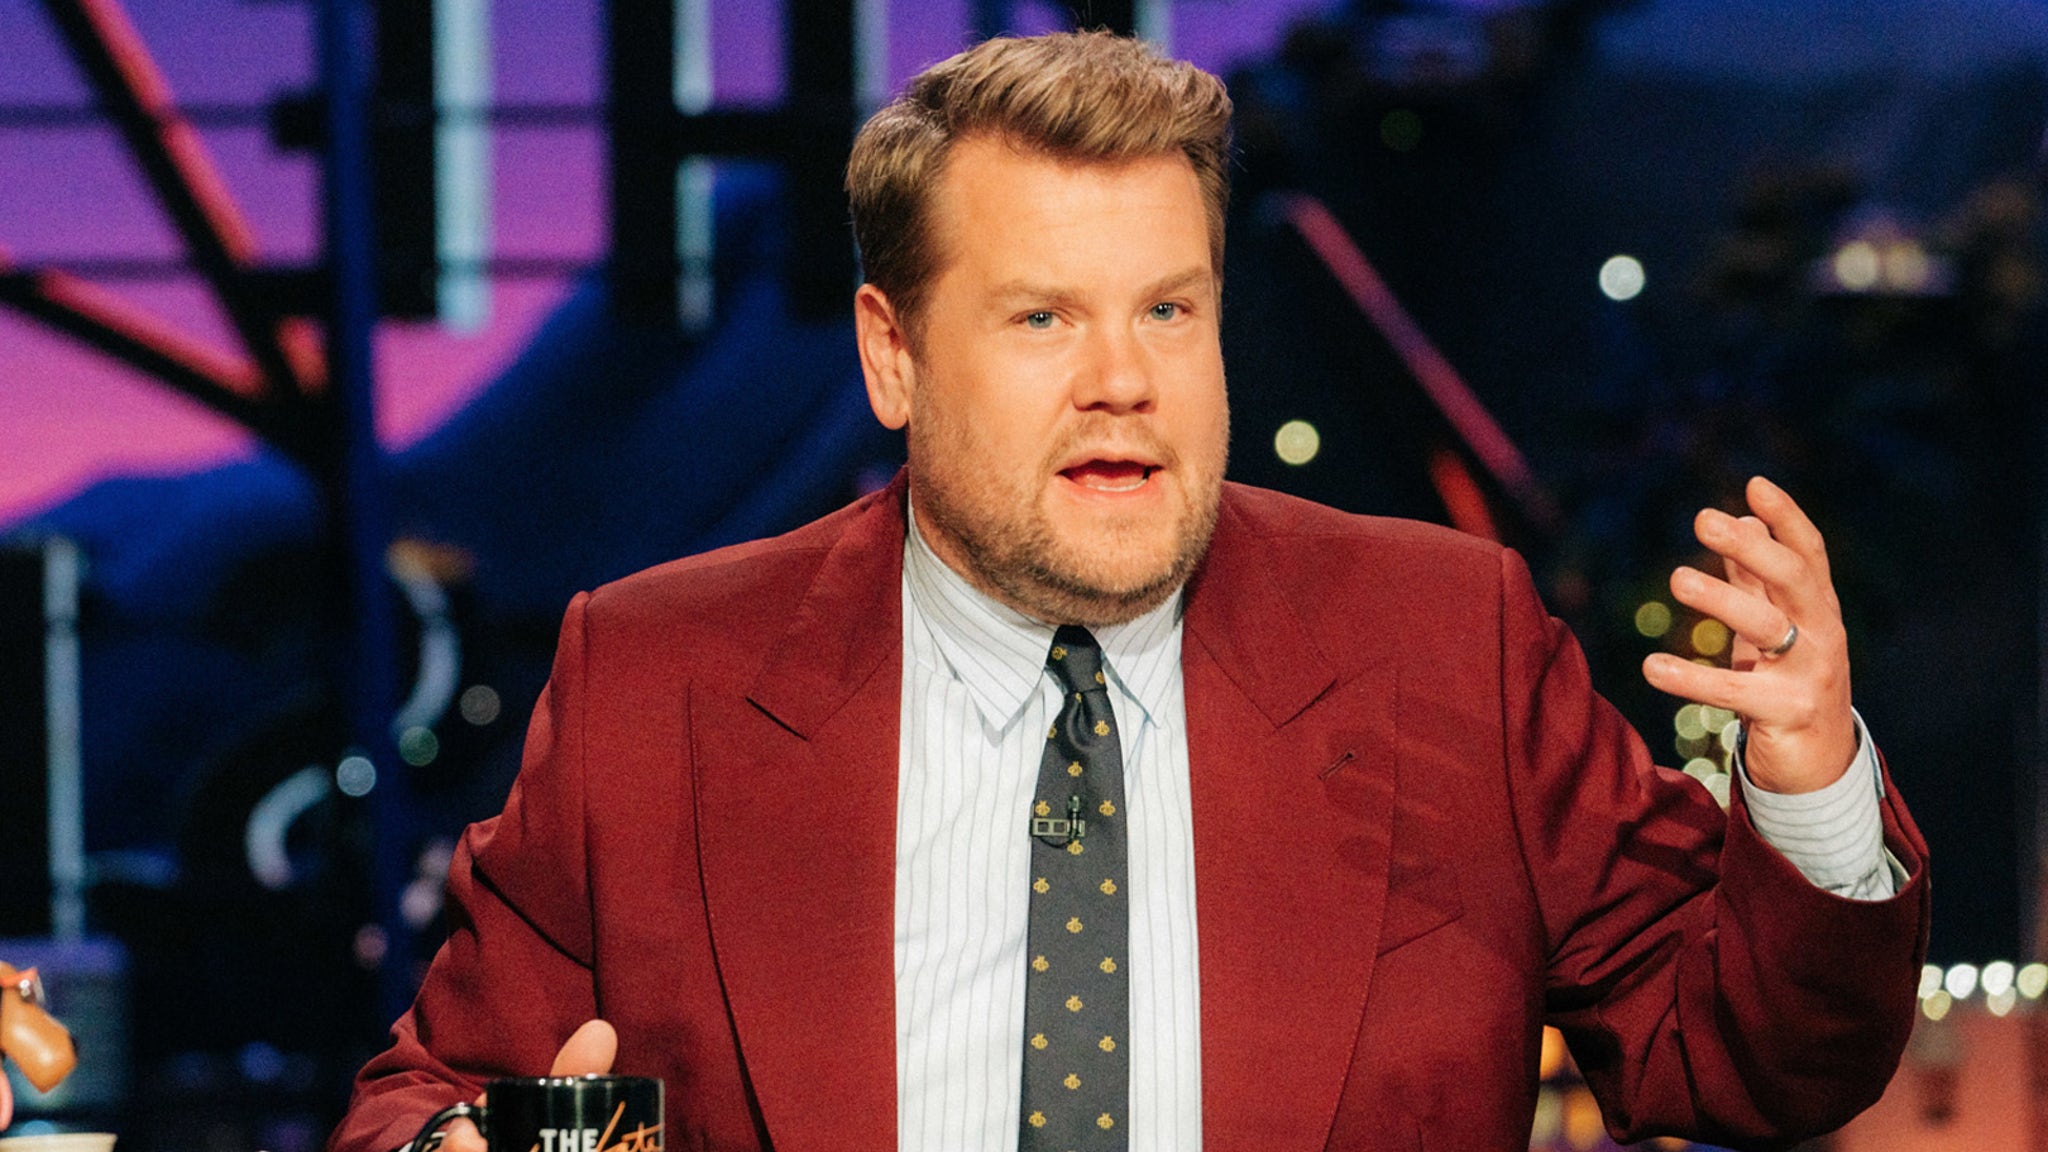 James Corden Exiting Late Late Show